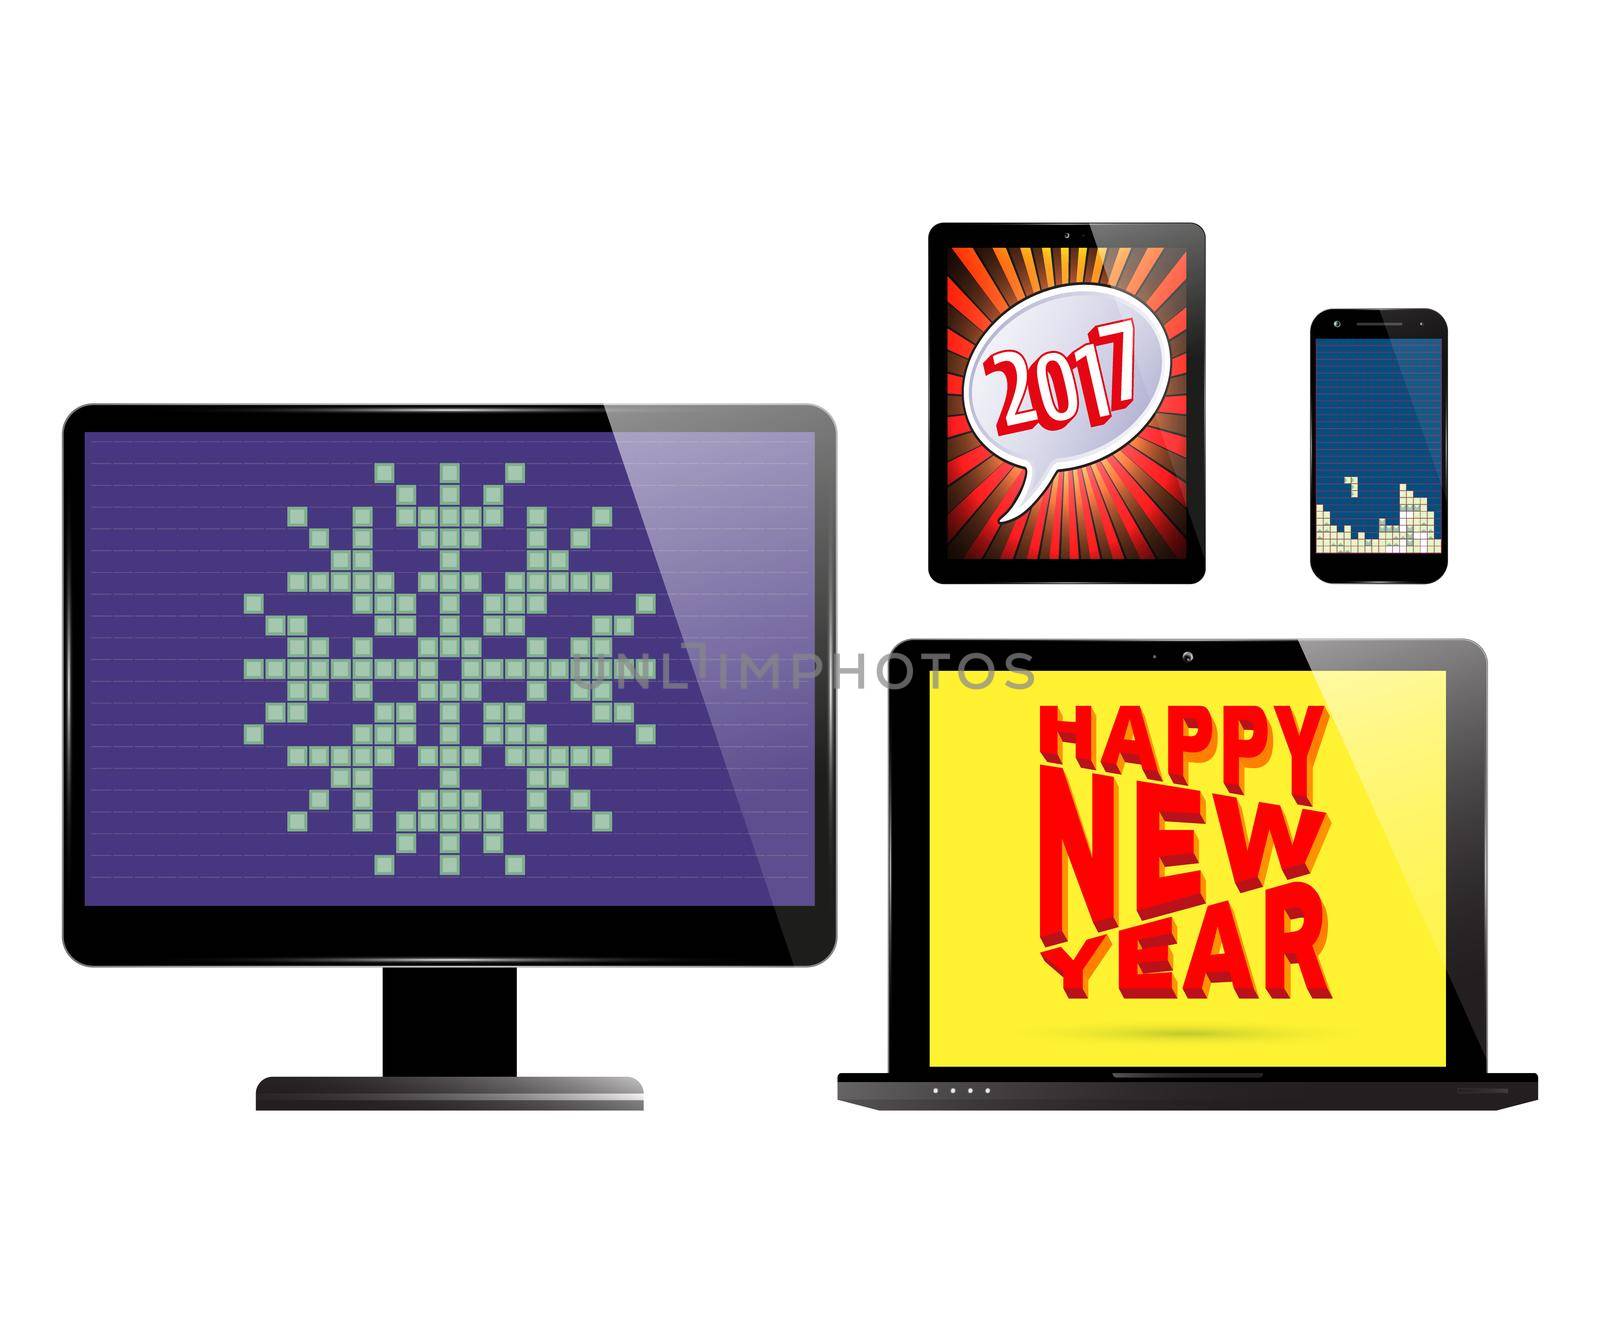 Smartphone, monitor PC computer, laptop and tablet with various holidays screen savers. Electronic devices isolated on white background. Vector illustration.